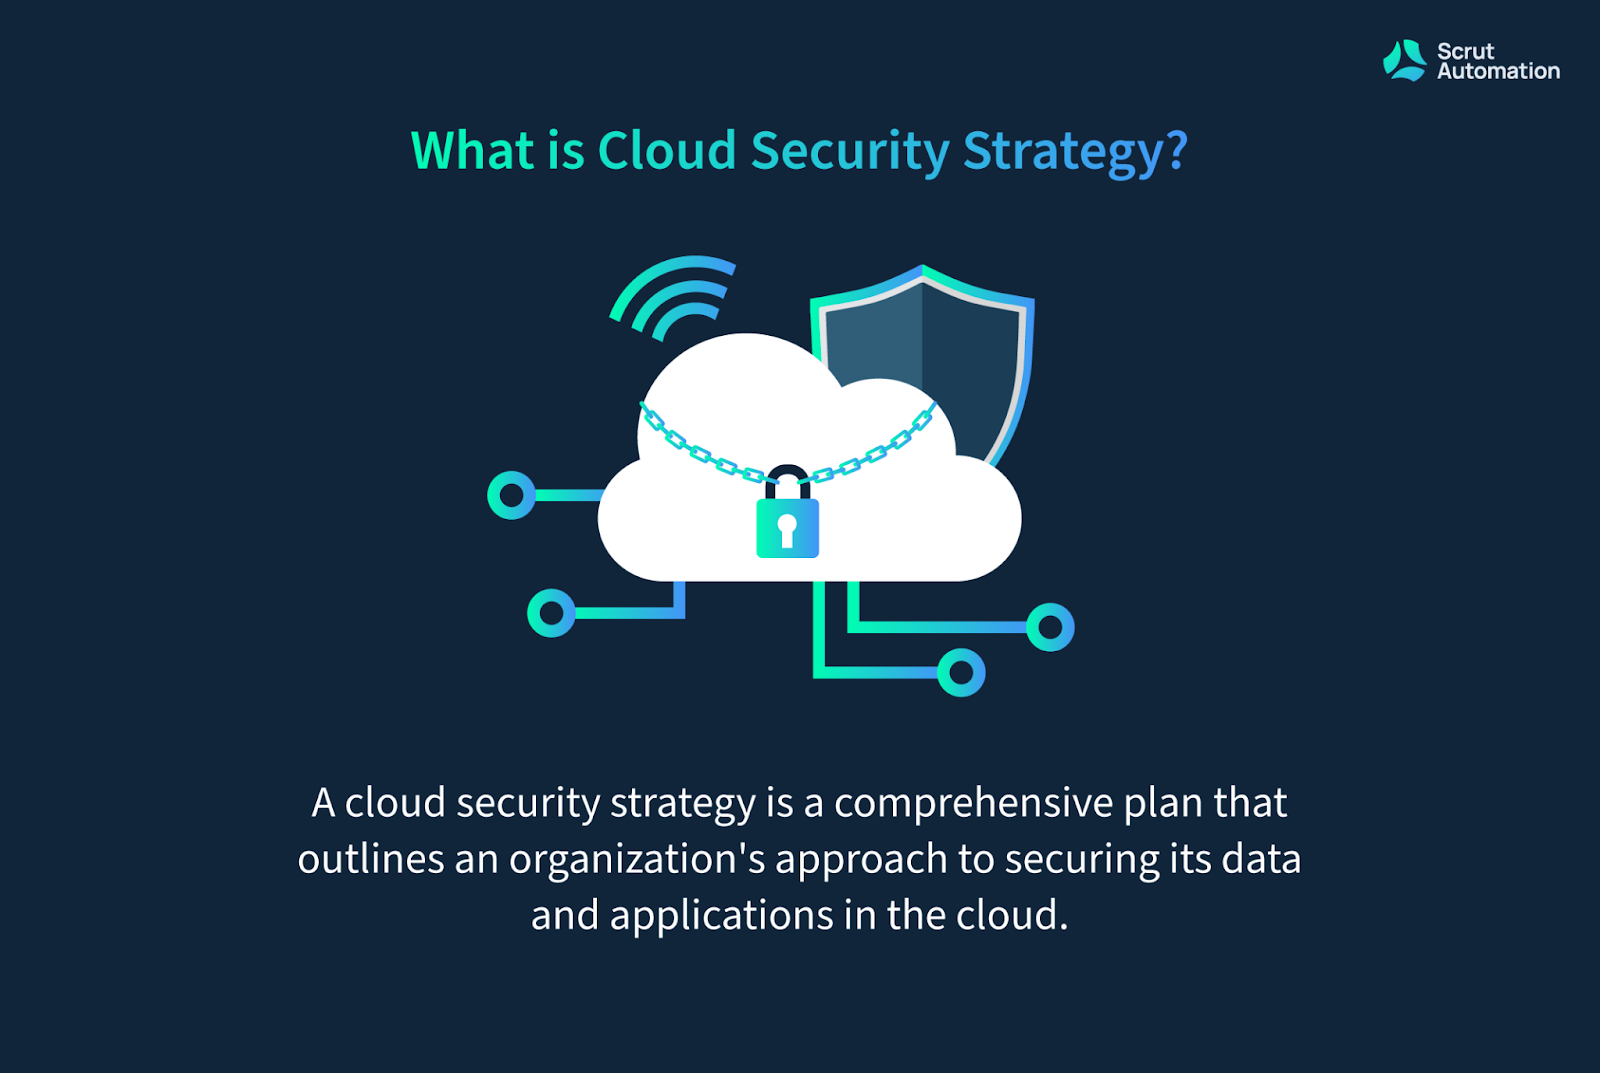 Meaning of cloud security strategy